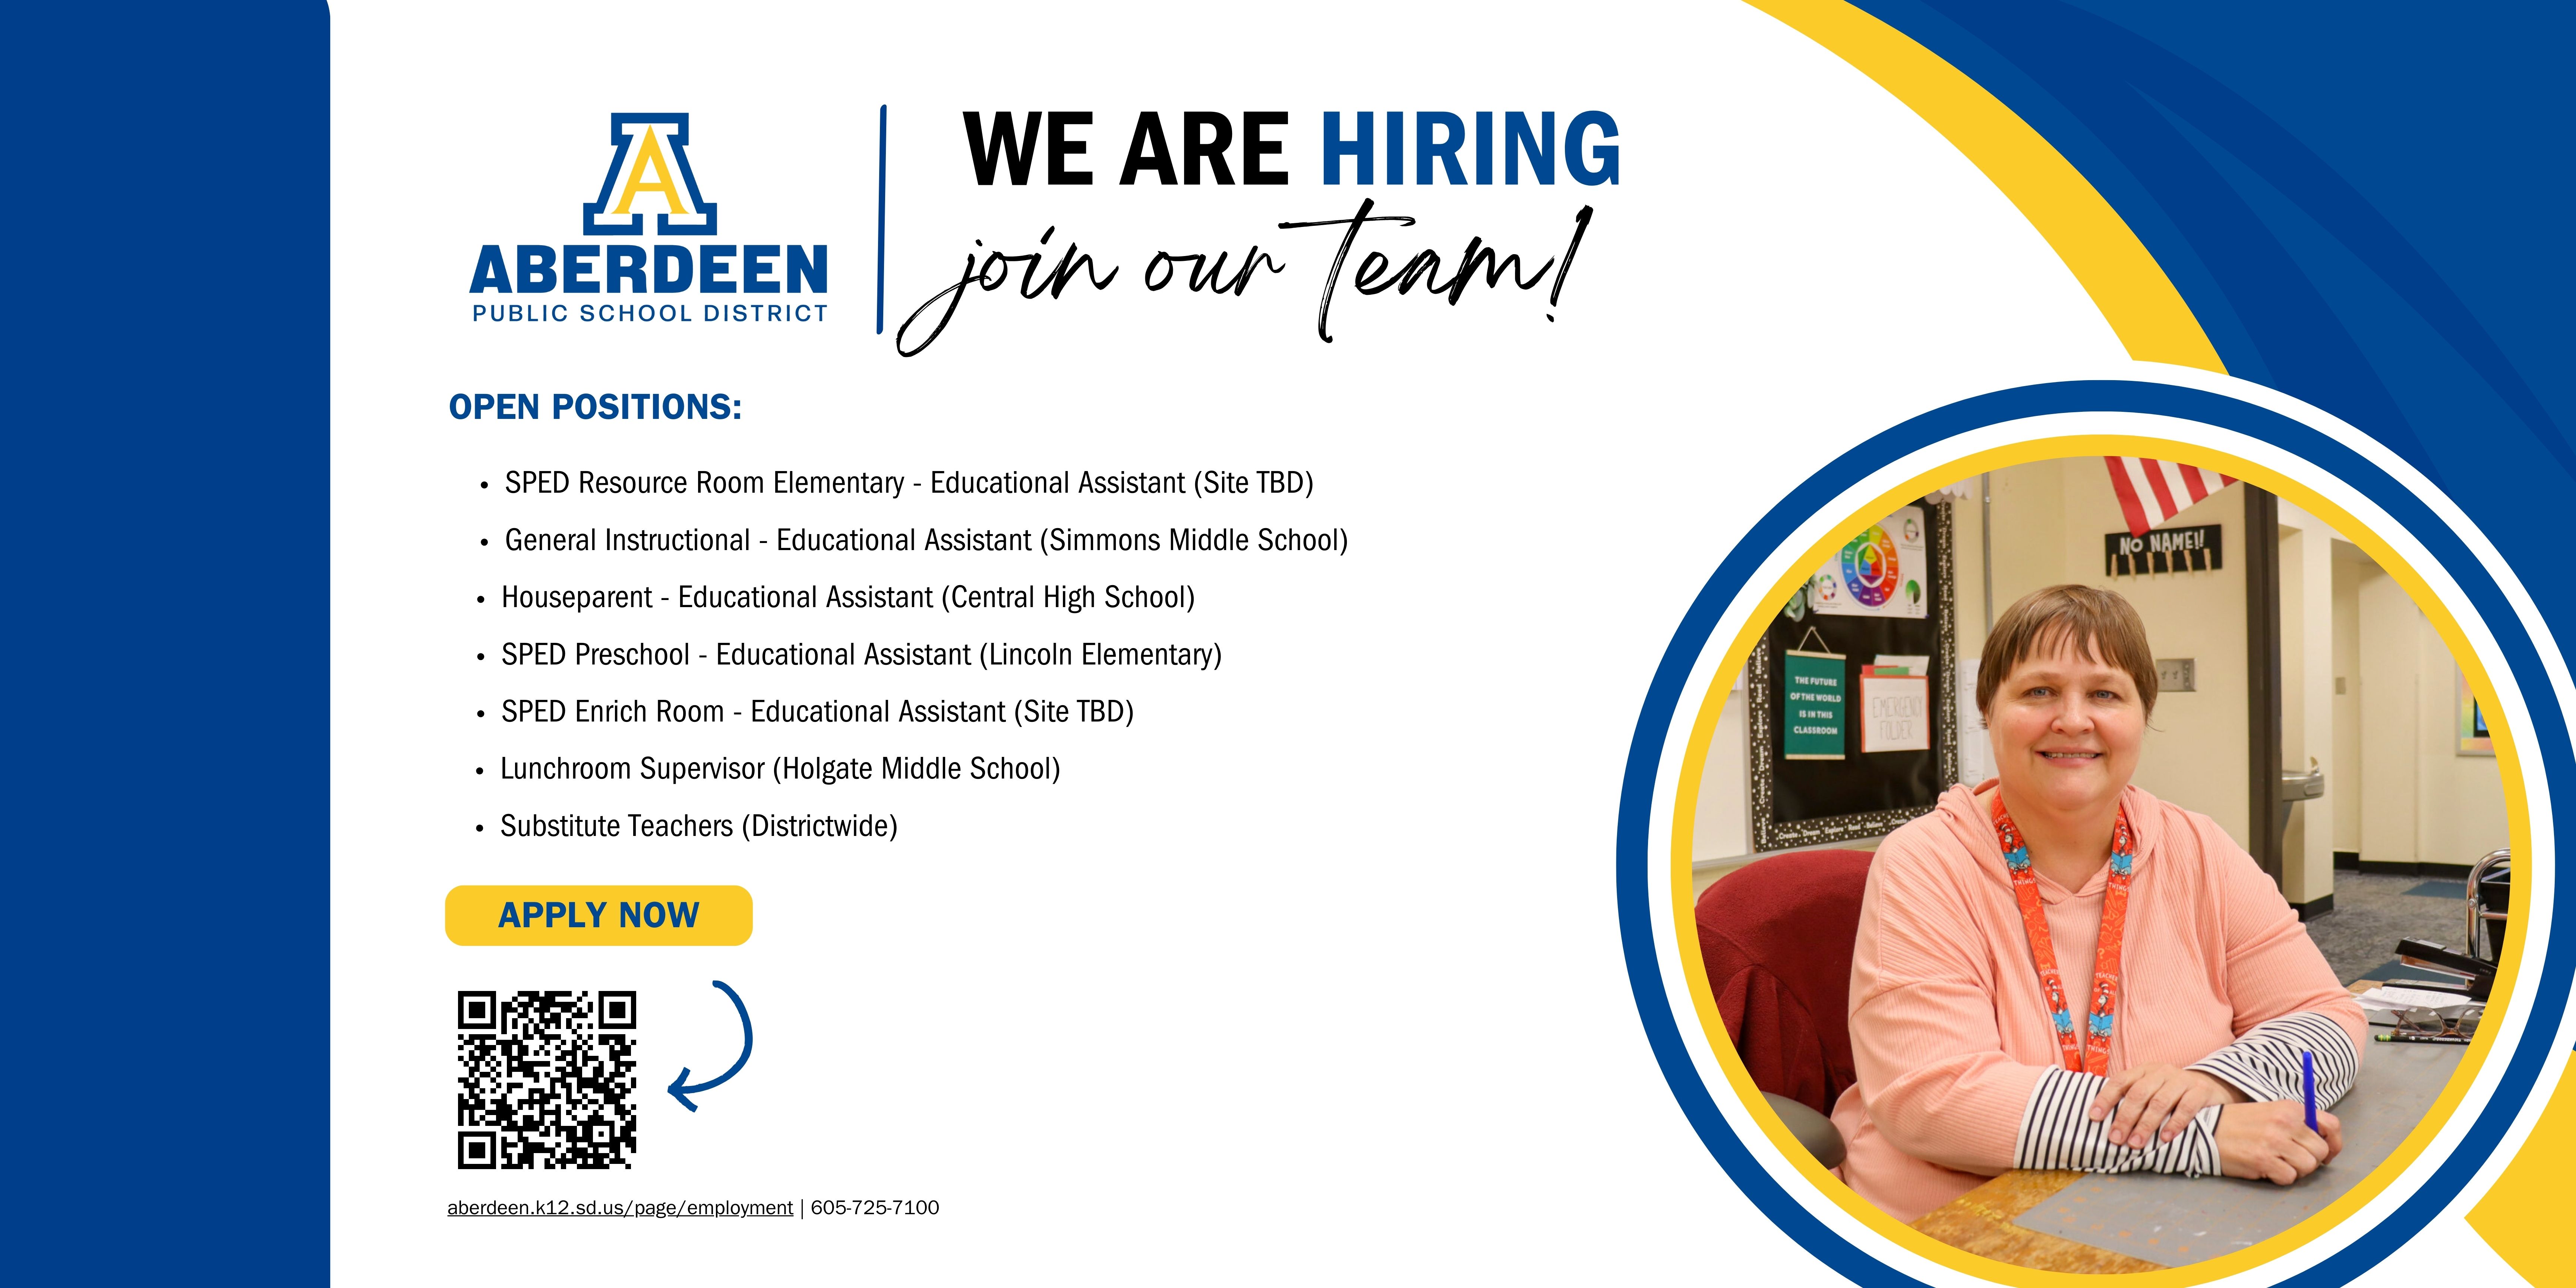 We are hiring - join our team! graphic with list of open positions: SPED resource room elementary EA, General instructional EA, houseparent EA, SPED preschool EA, SPEC Enrich Room EA, Lunchroom supervisor, and substitute teachers; with photo of teacher and link to apply now: aberdeen.k12.sd.us/page/employment; 605-725-7100